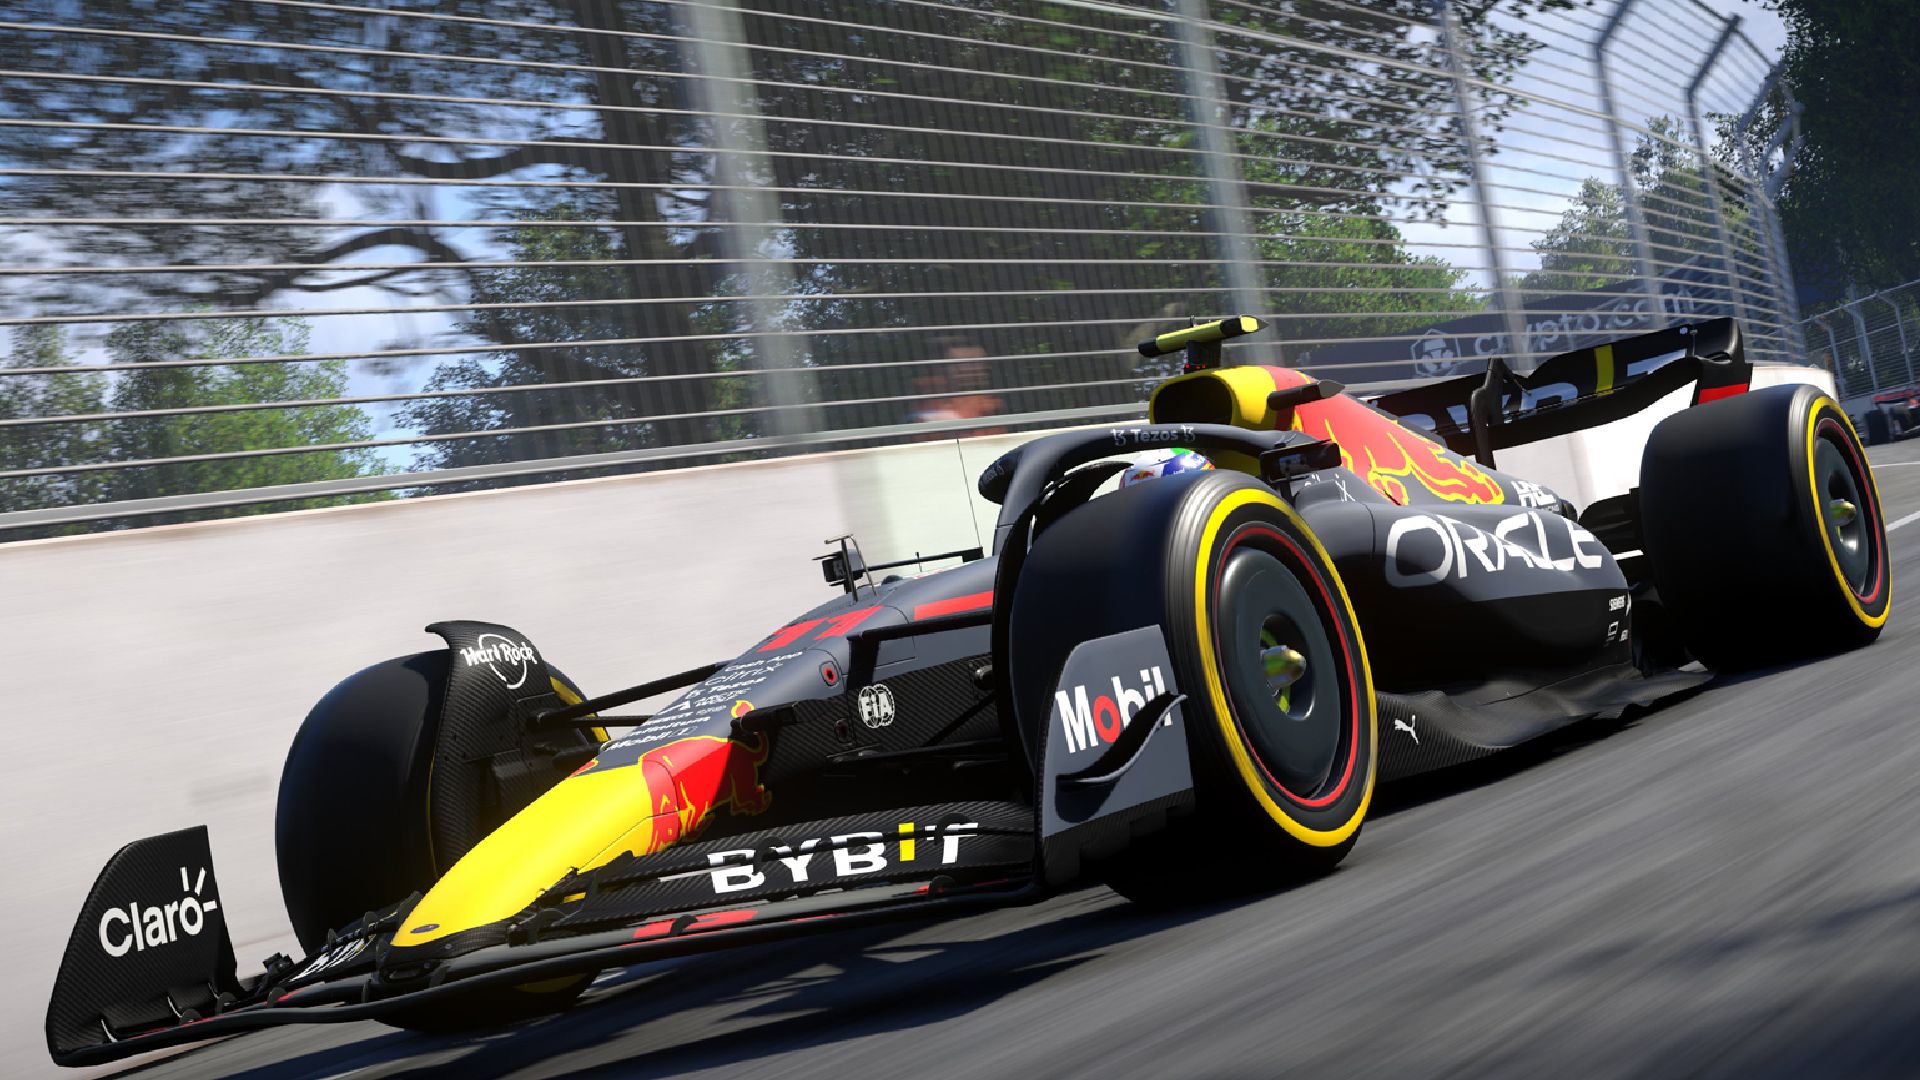 F1 22 Cross-Play and Podium Pass Series 2 Available on All Platforms